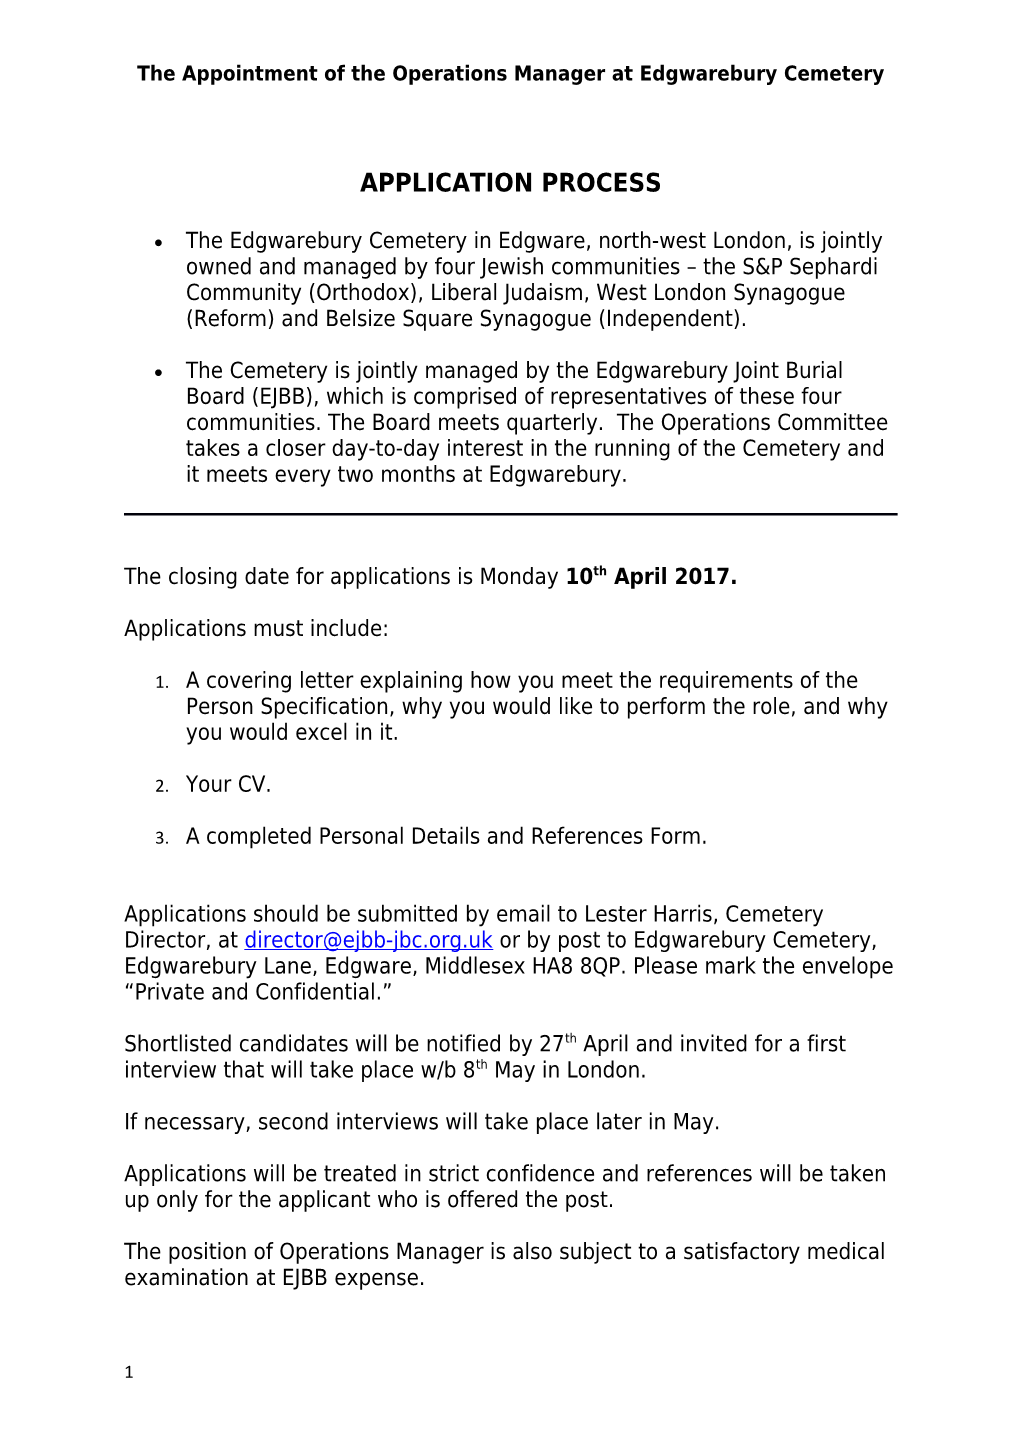 The Appointment of the Operations Manager at Edgwarebury Cemetery